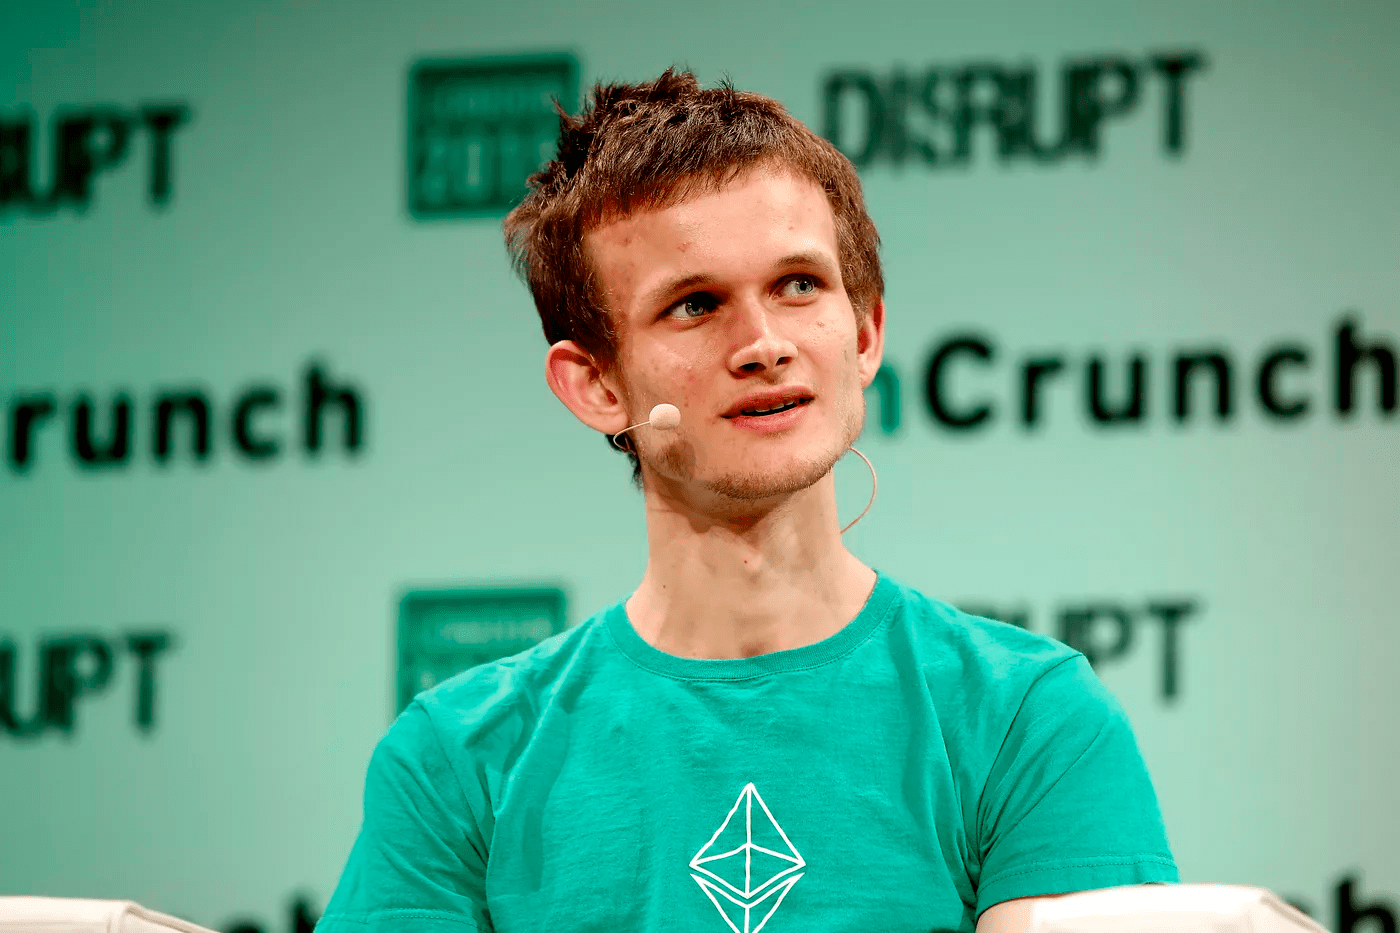 BUTERIN STANDS UP FOR CRYPTO HODLER